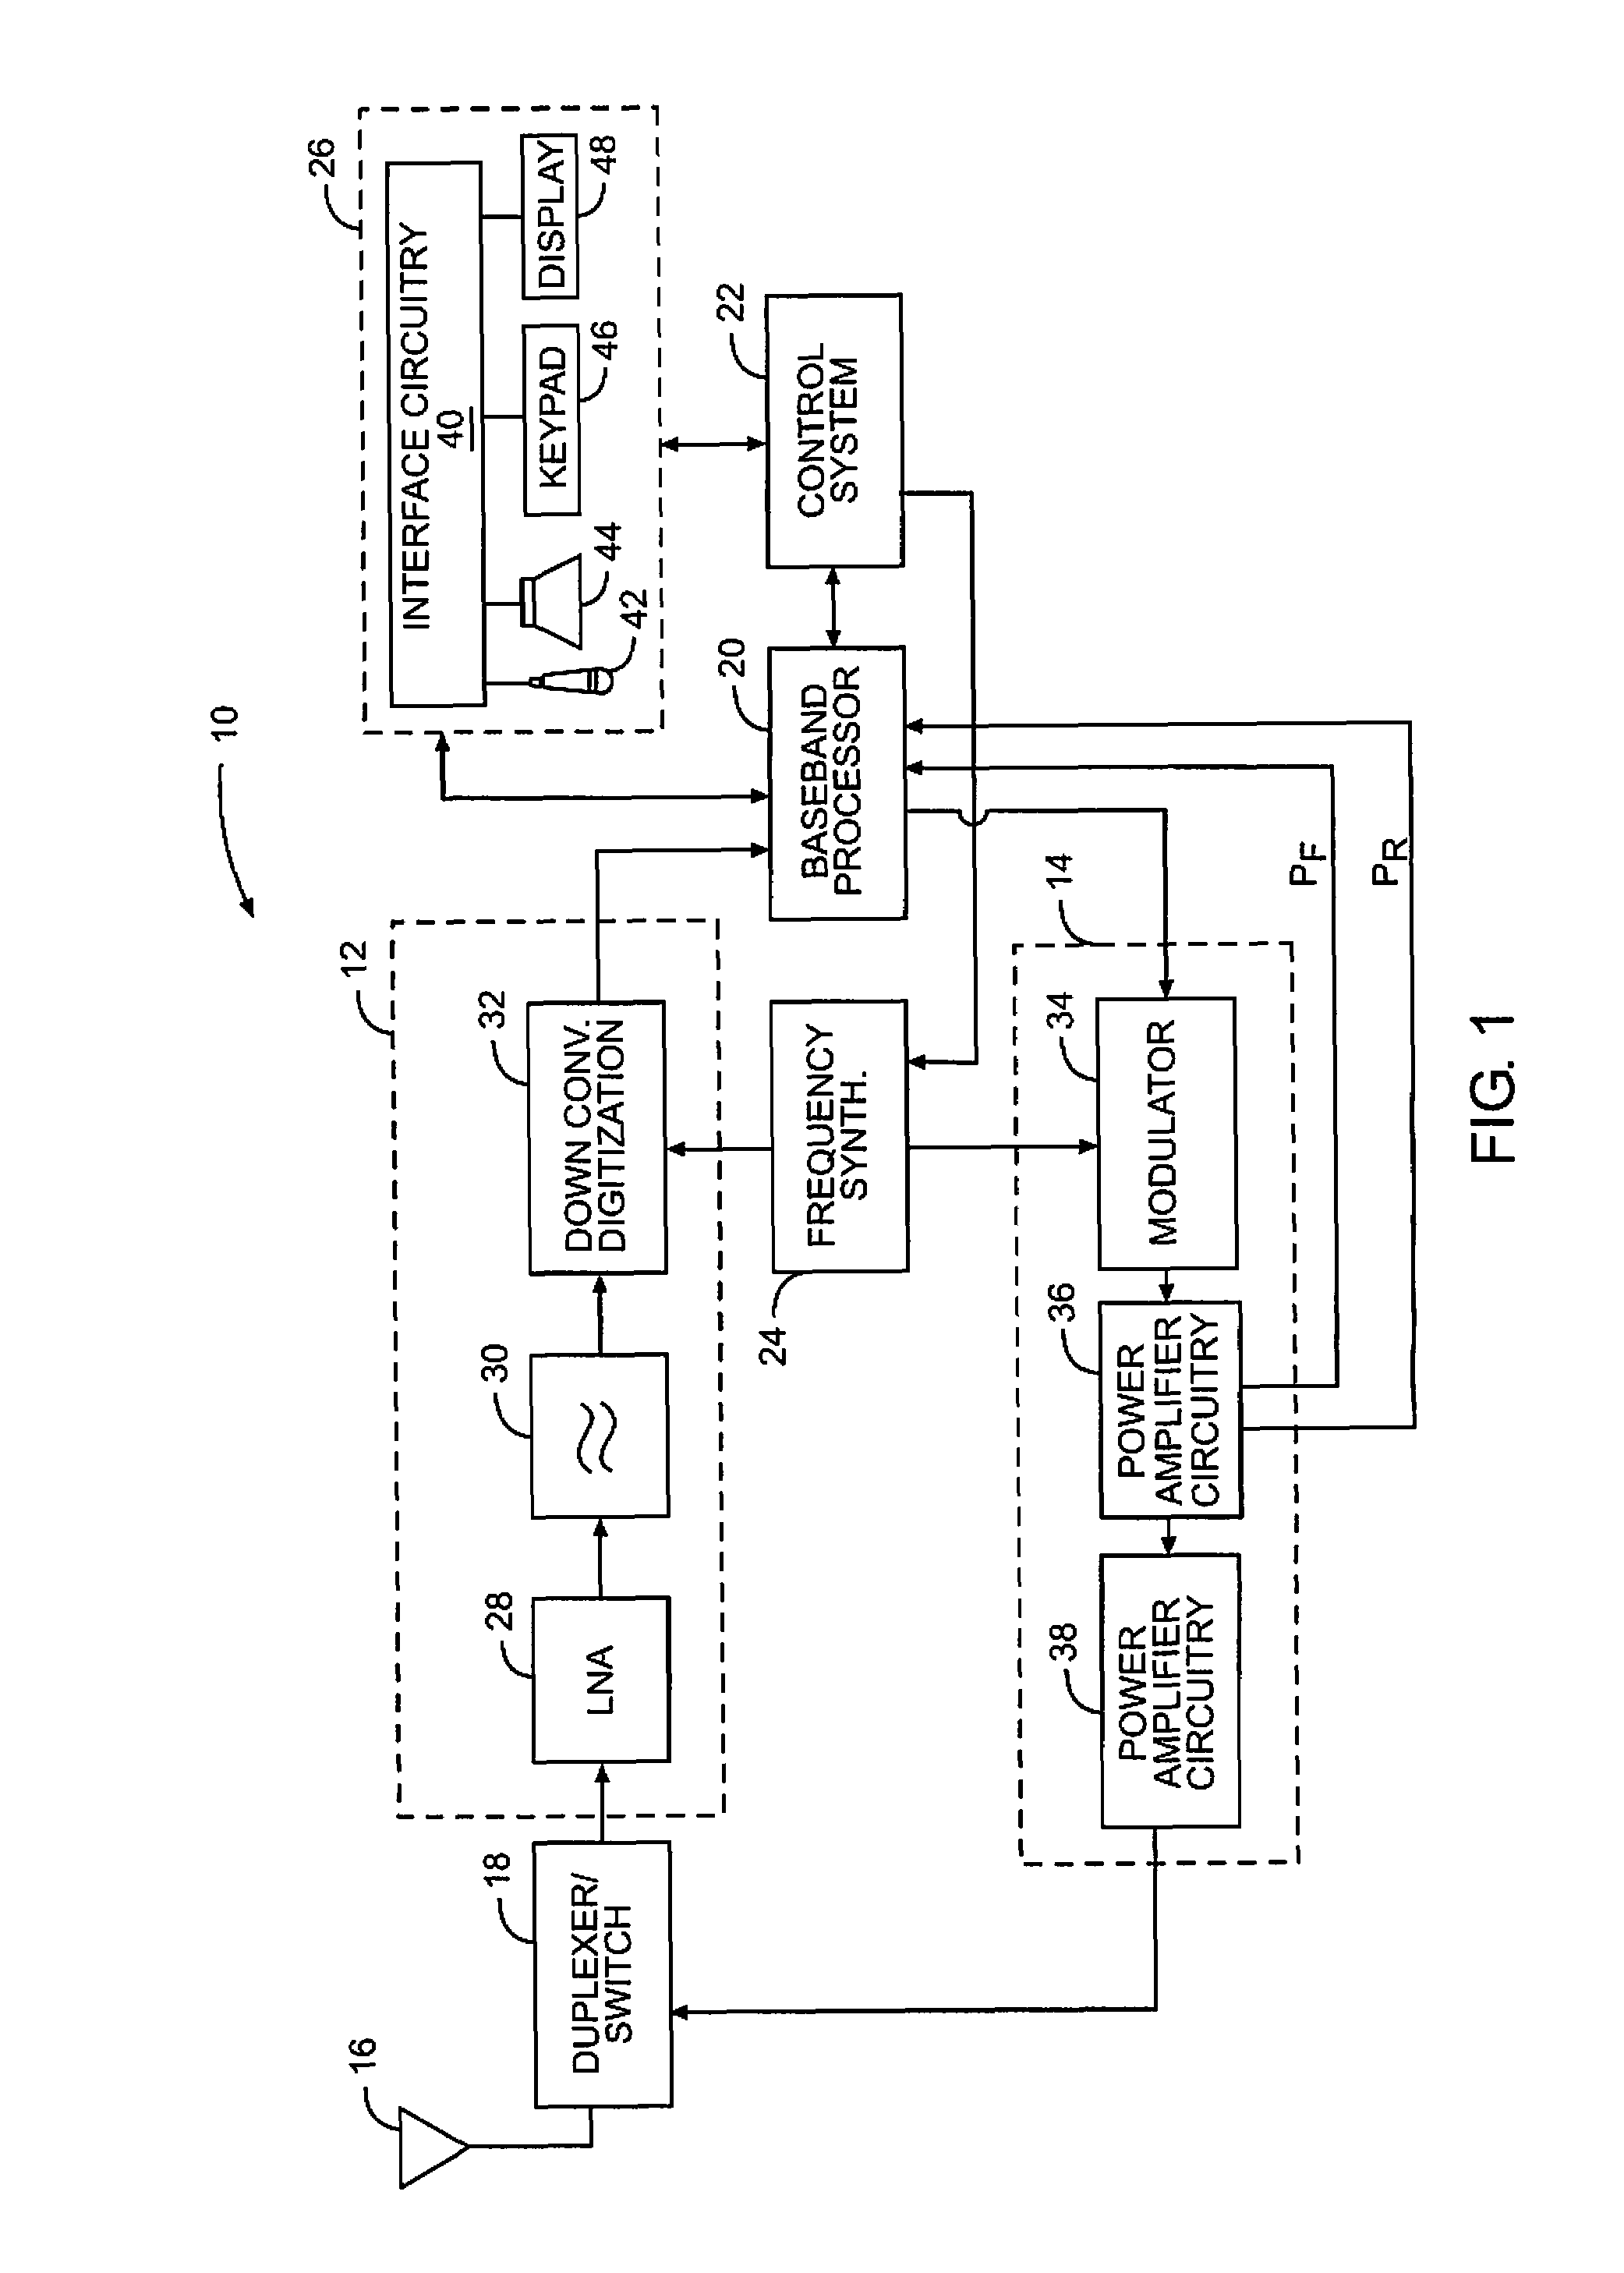 Forward and reverse VSWR insensitive power detection using phase shifting and harmonic filtering